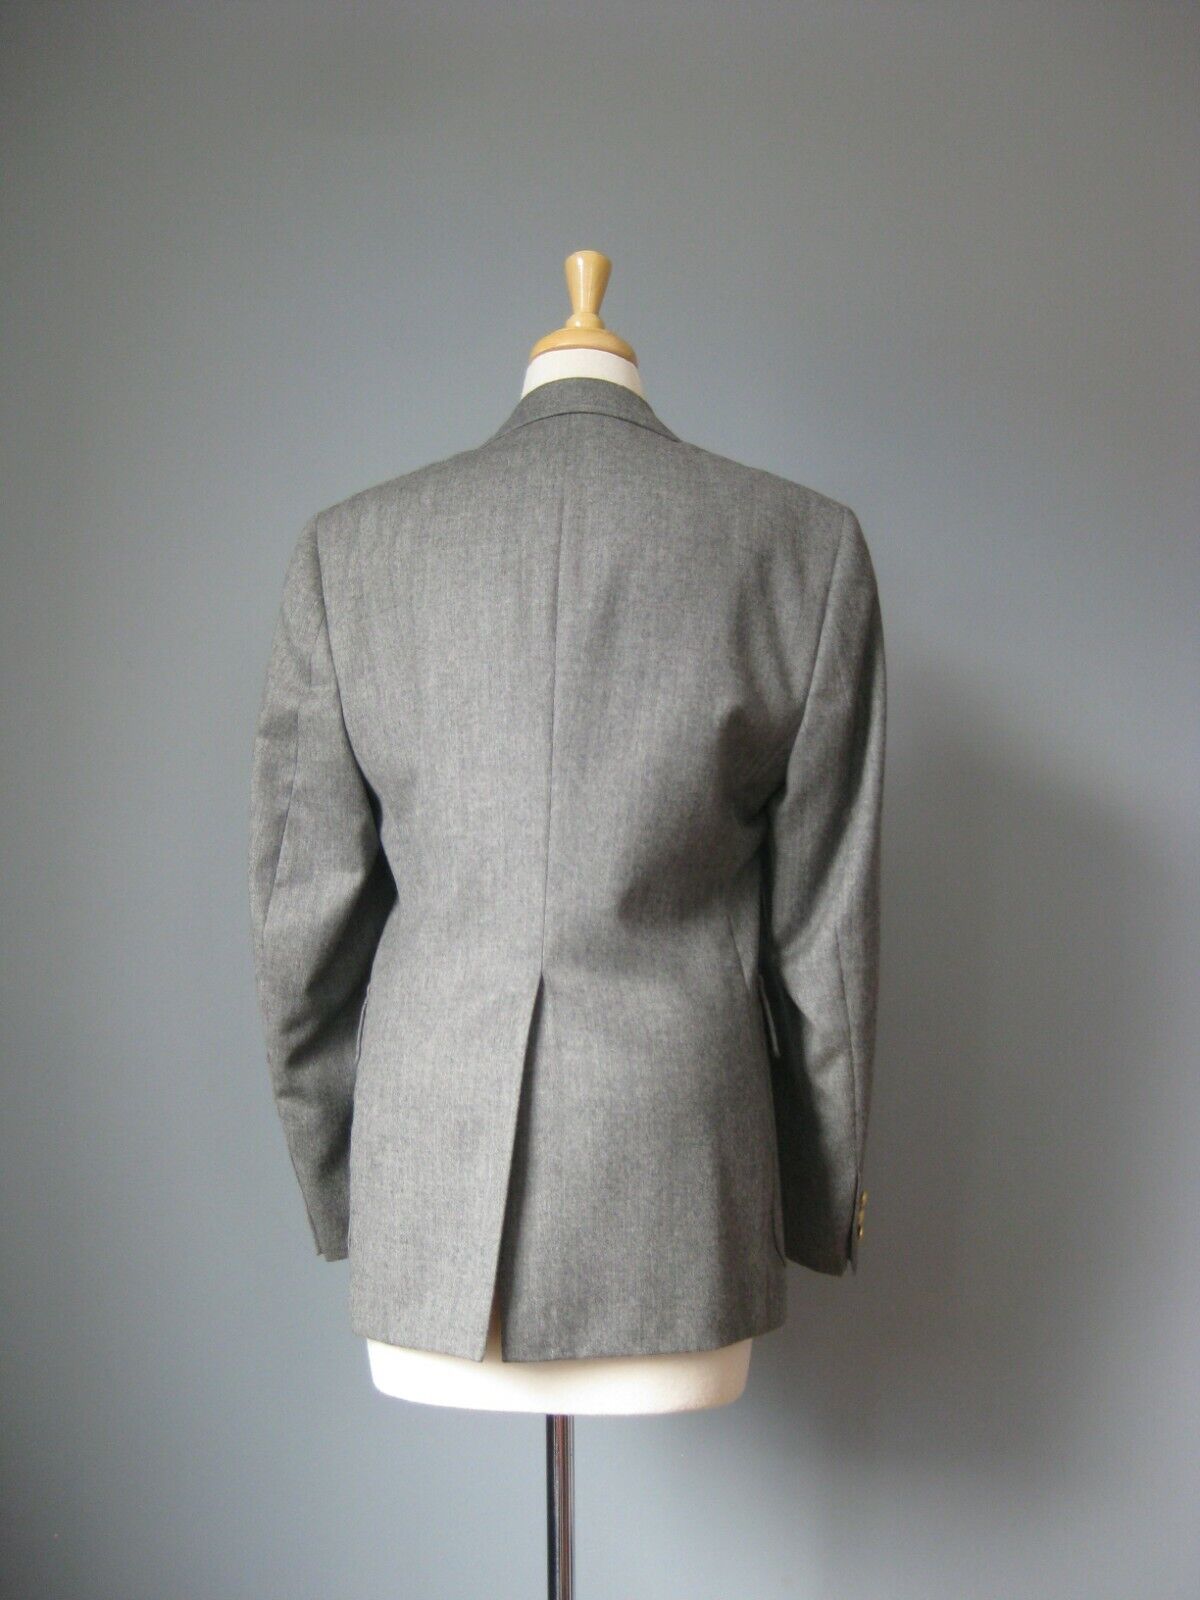 Vintage Mens Wool Blazer Gray w gold buttons - image 4